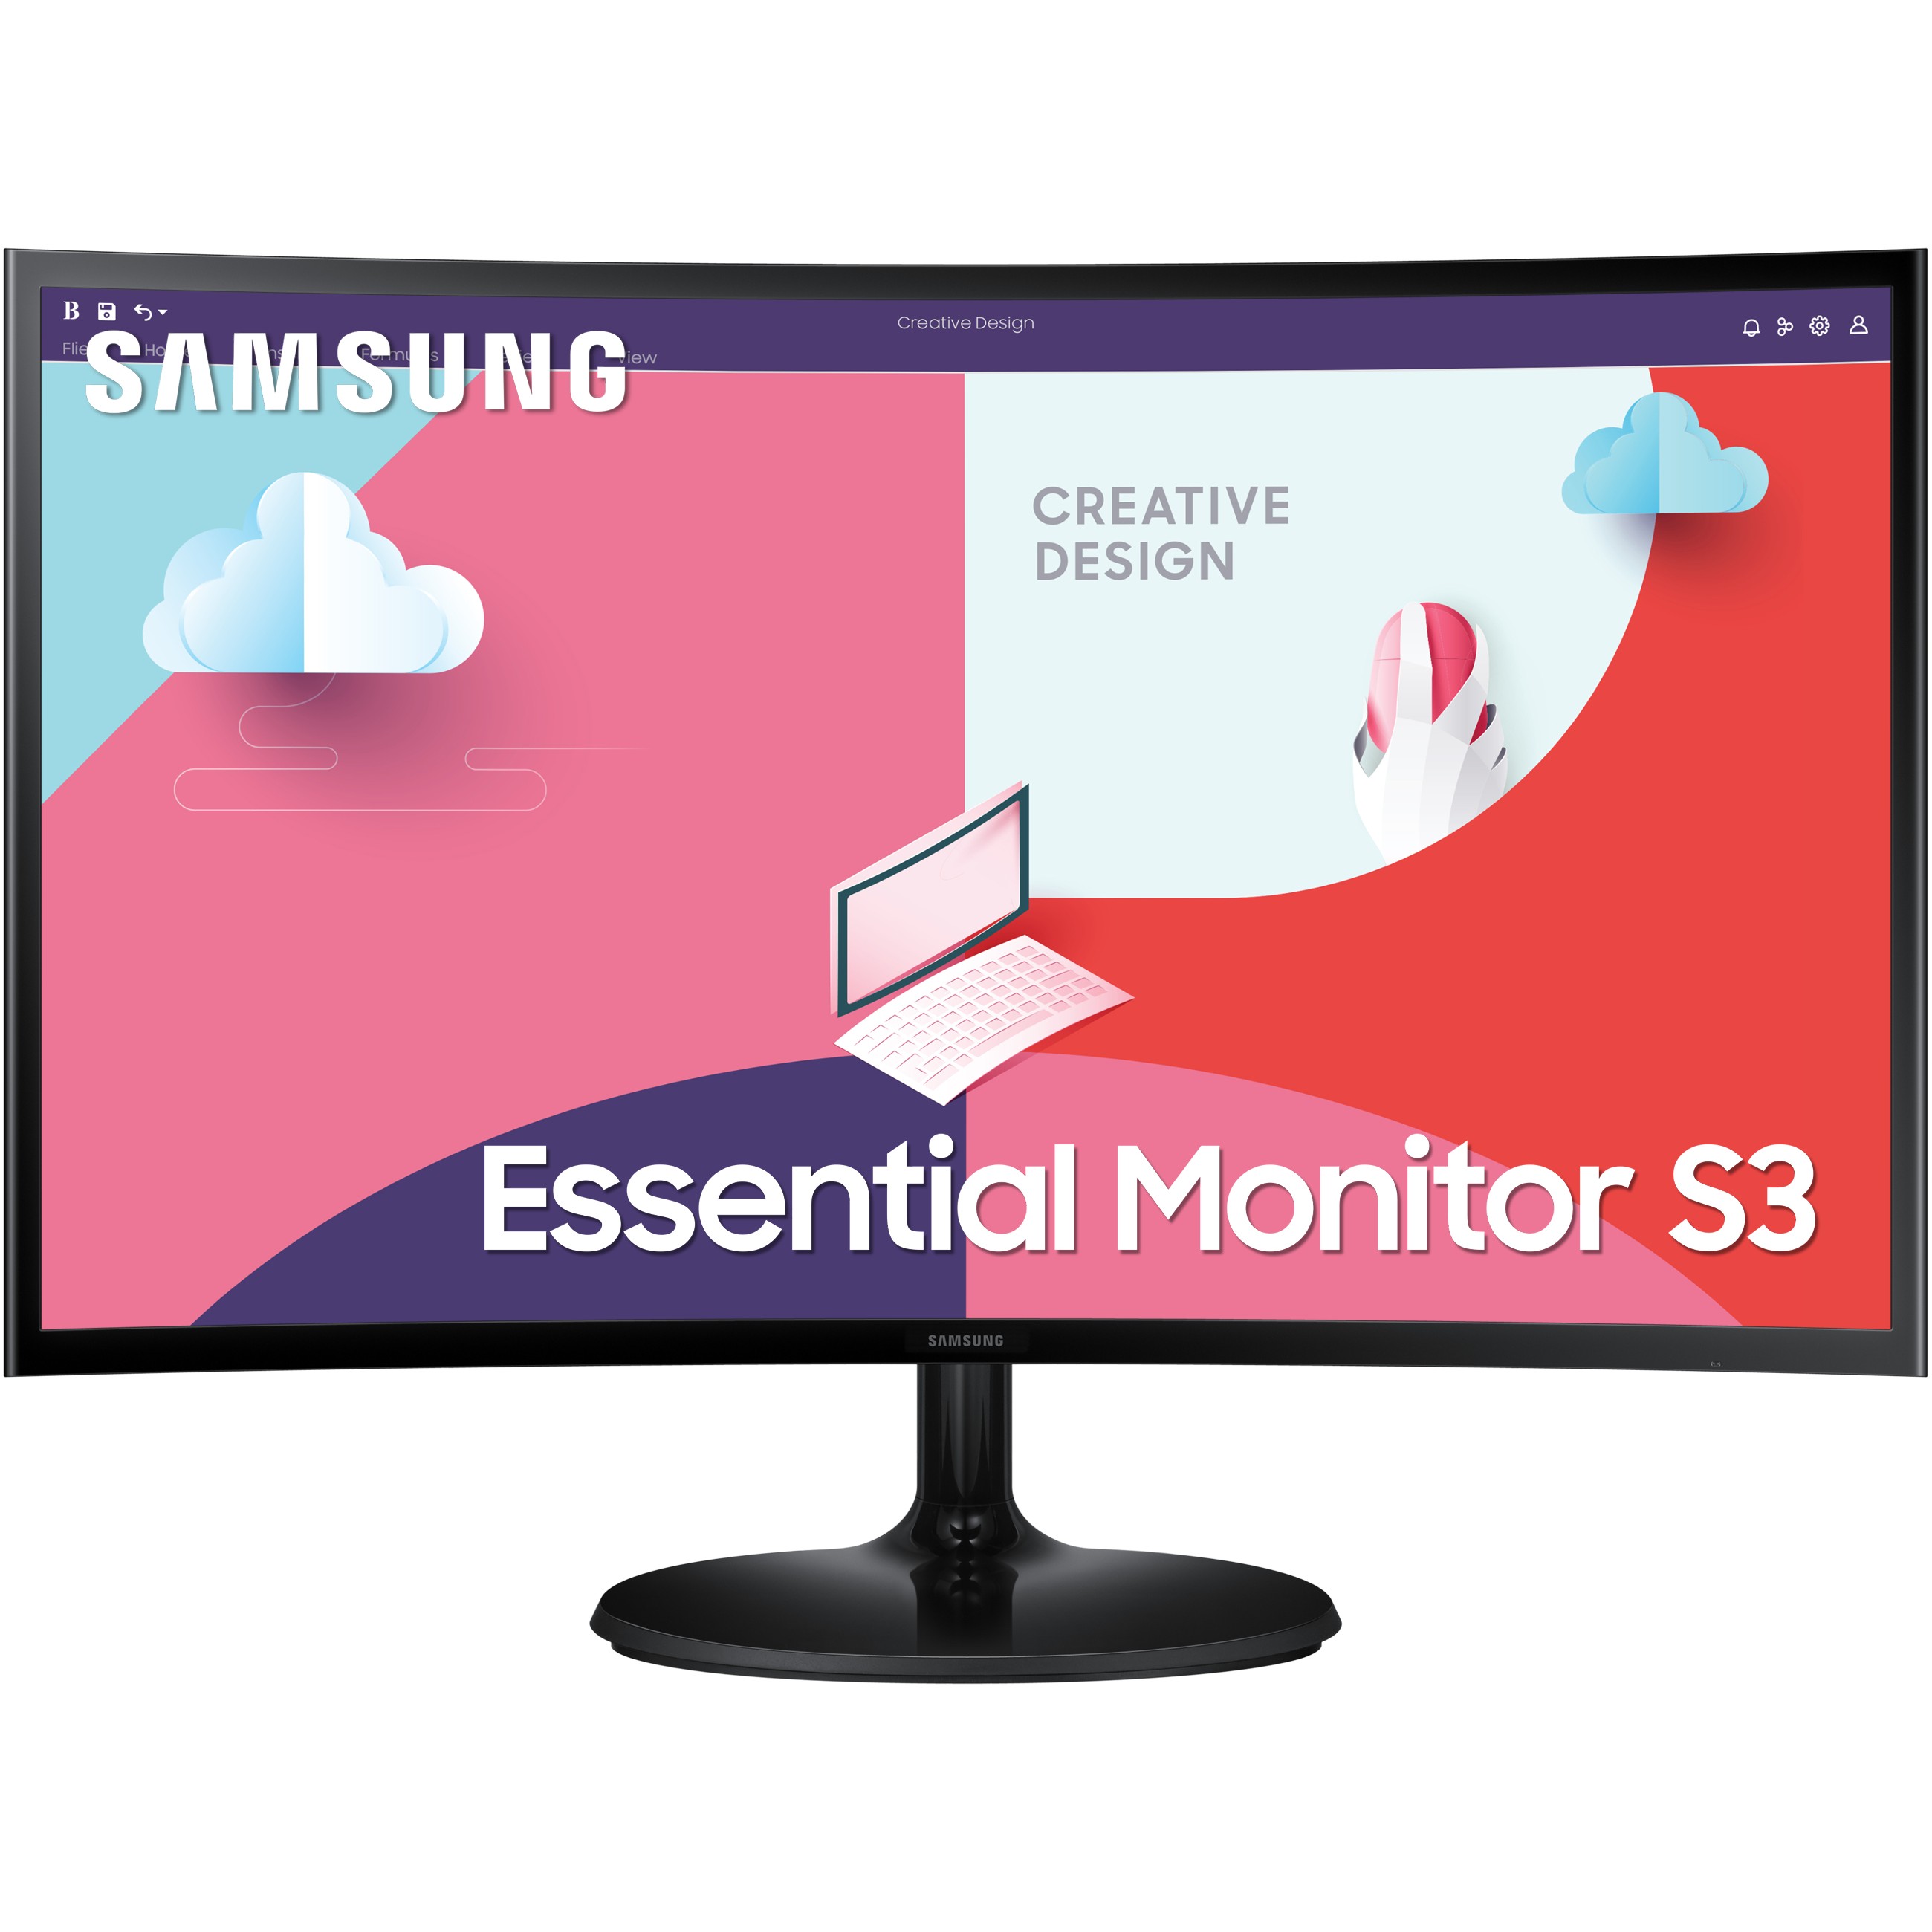 Samsung Essential Monitor S3 S36C LED display - LS27C364EAUXEN